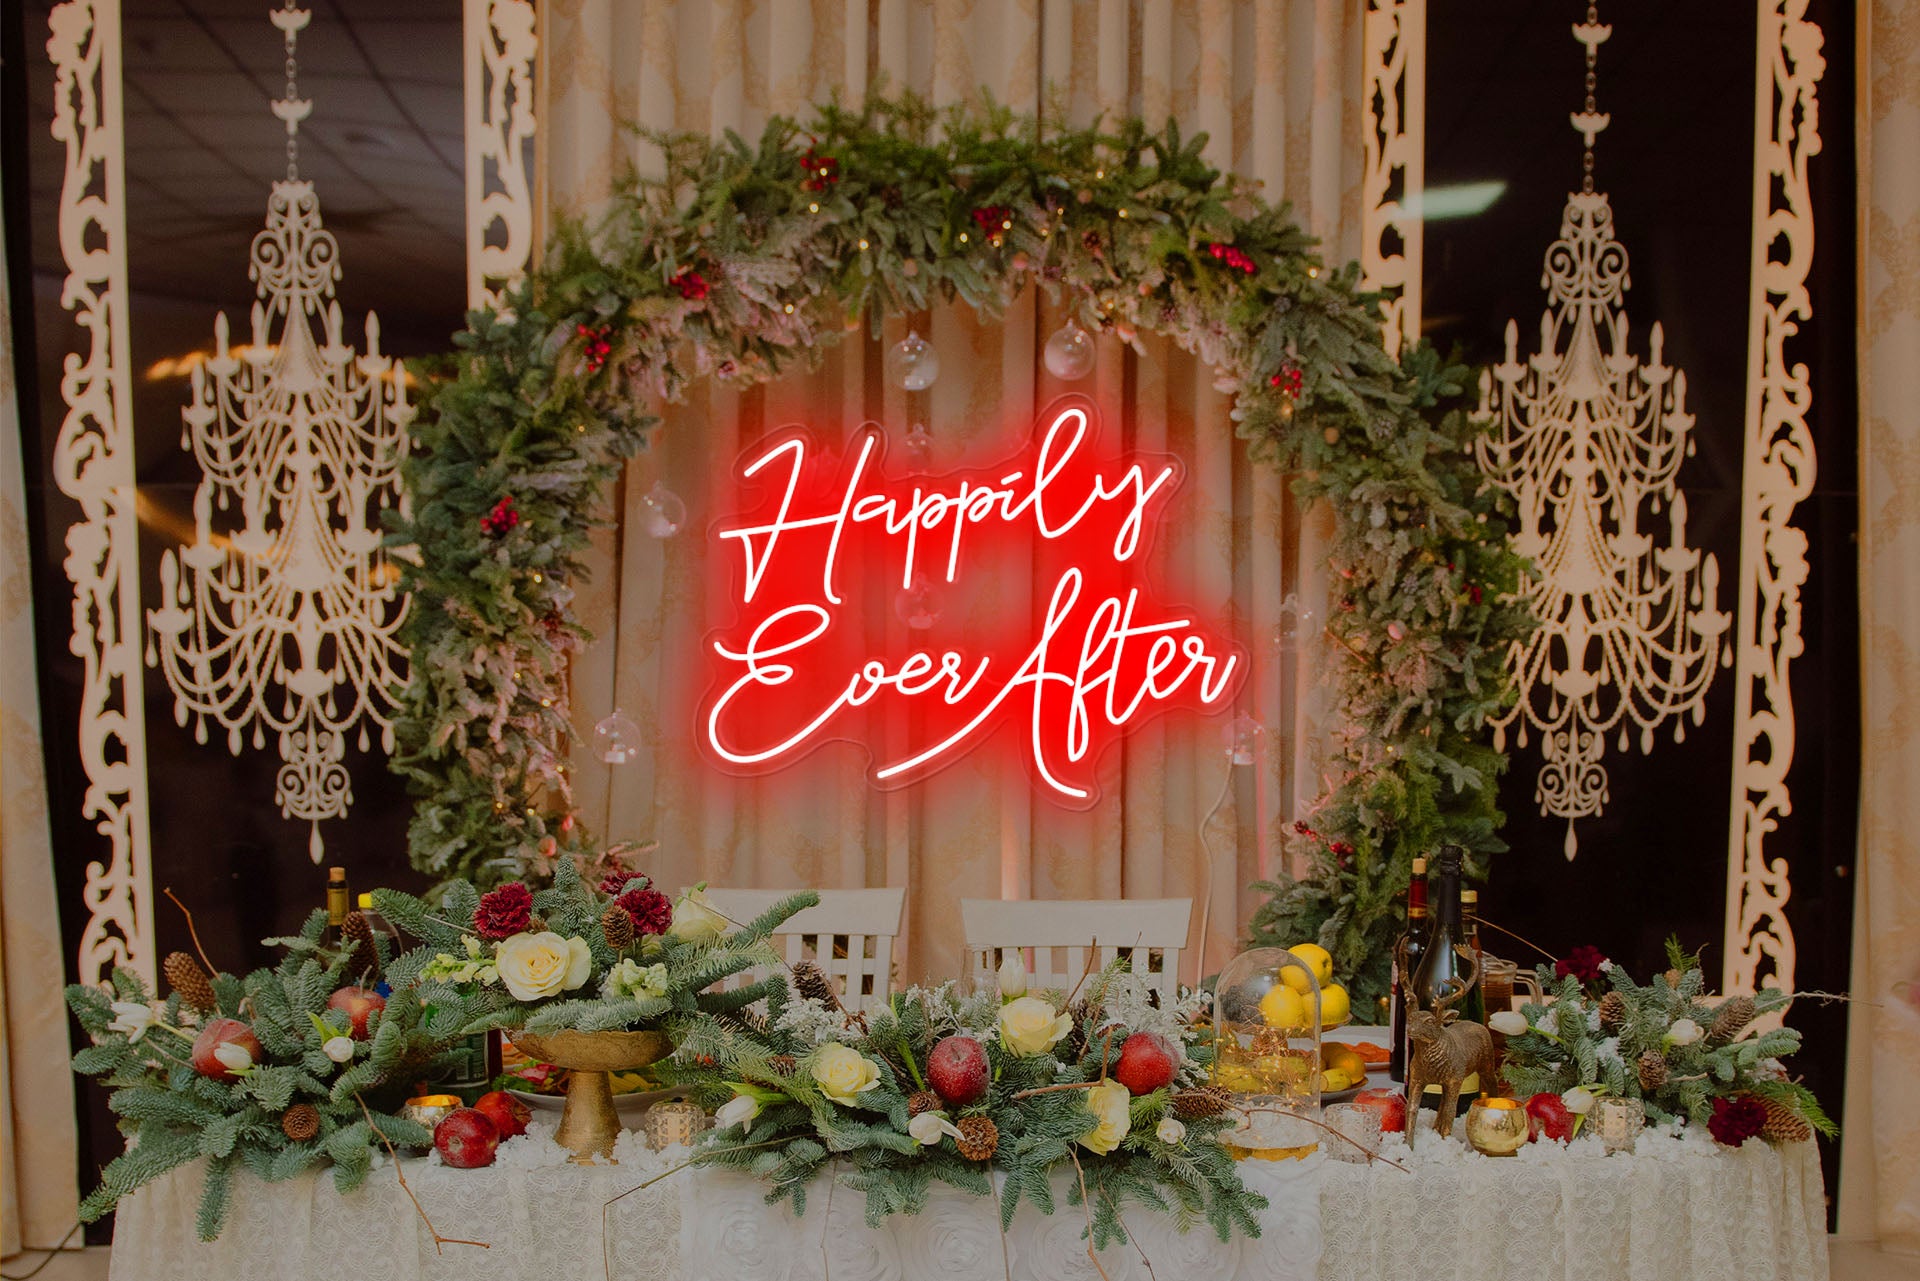 Happily Ever After pink neon wedding sign